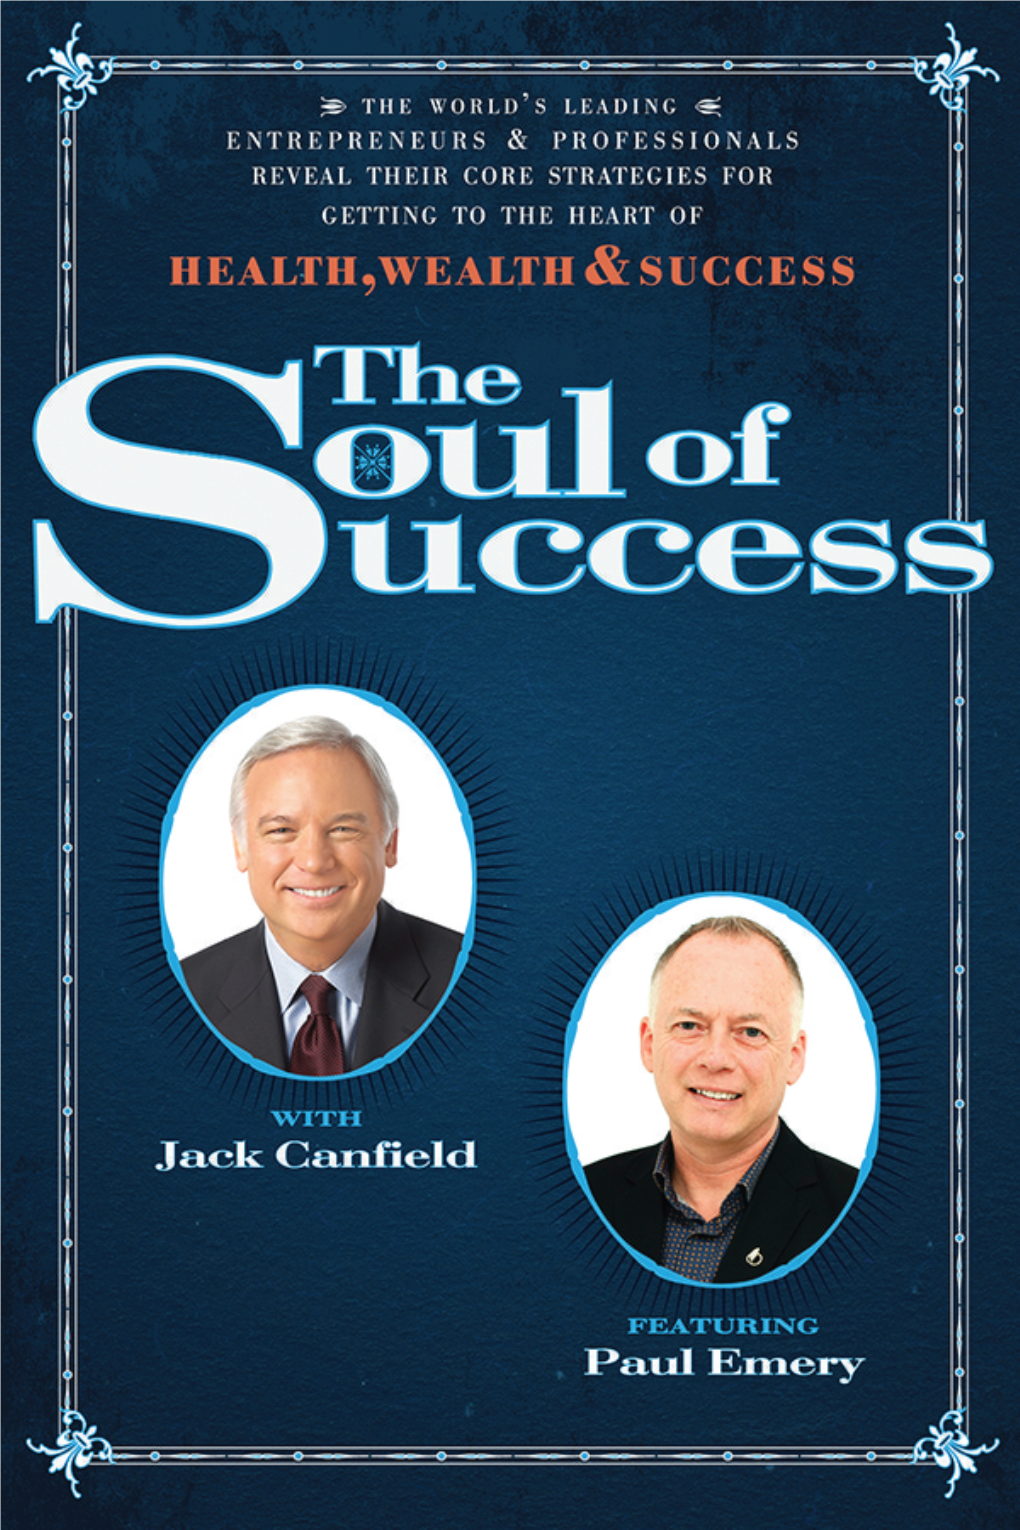 THE SOUL of SUCCESS by Jack Canfield